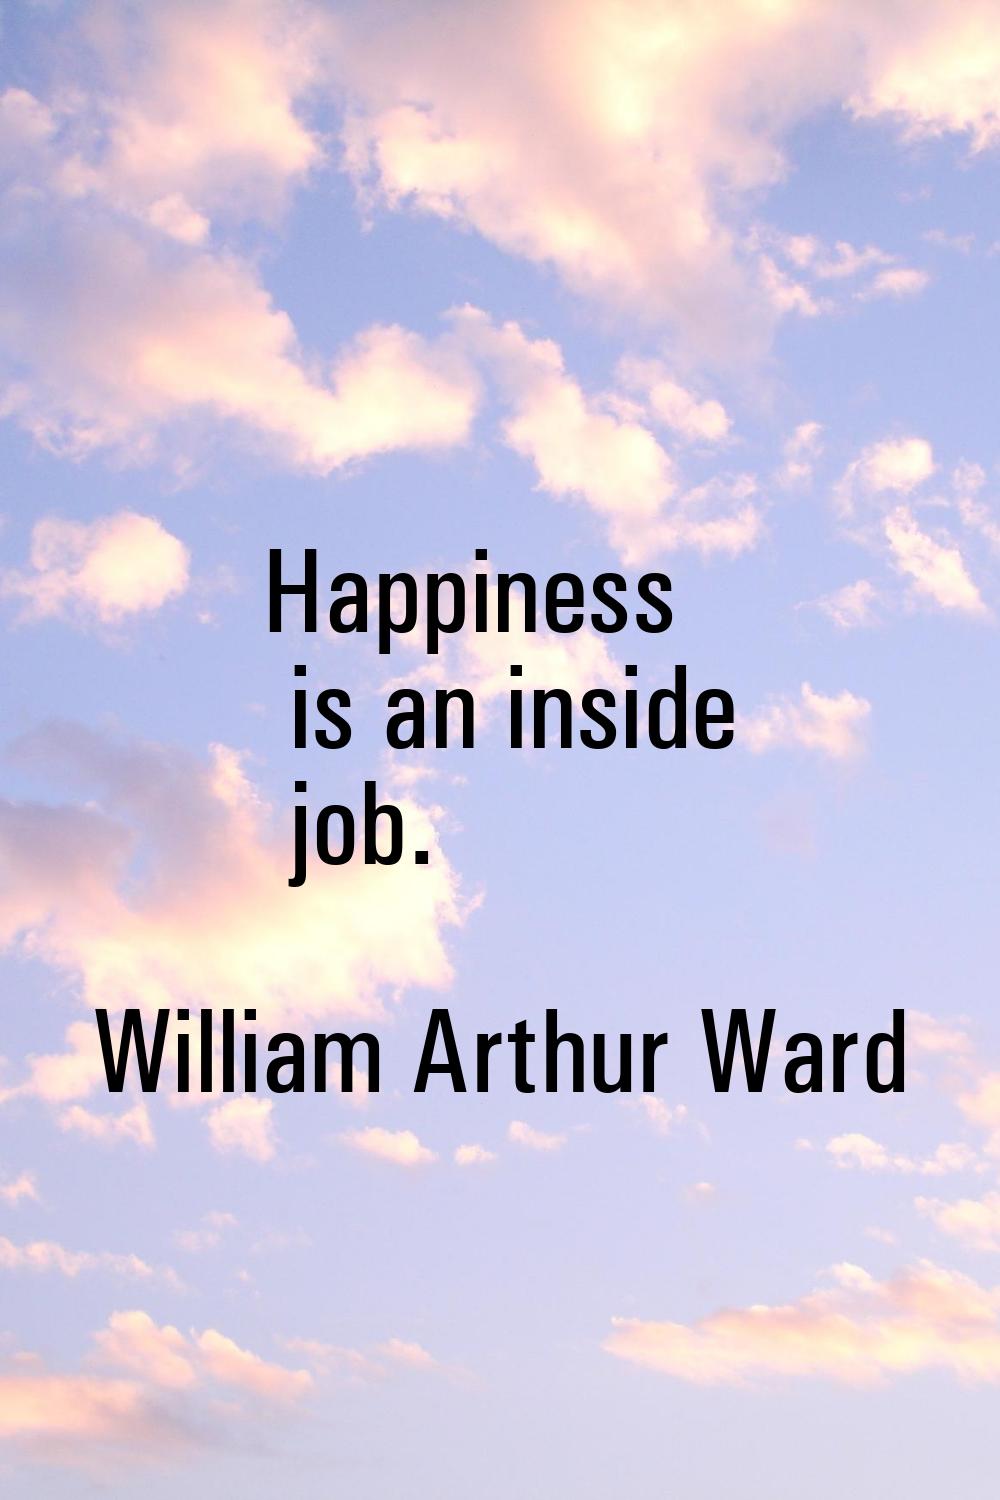 Happiness is an inside job.